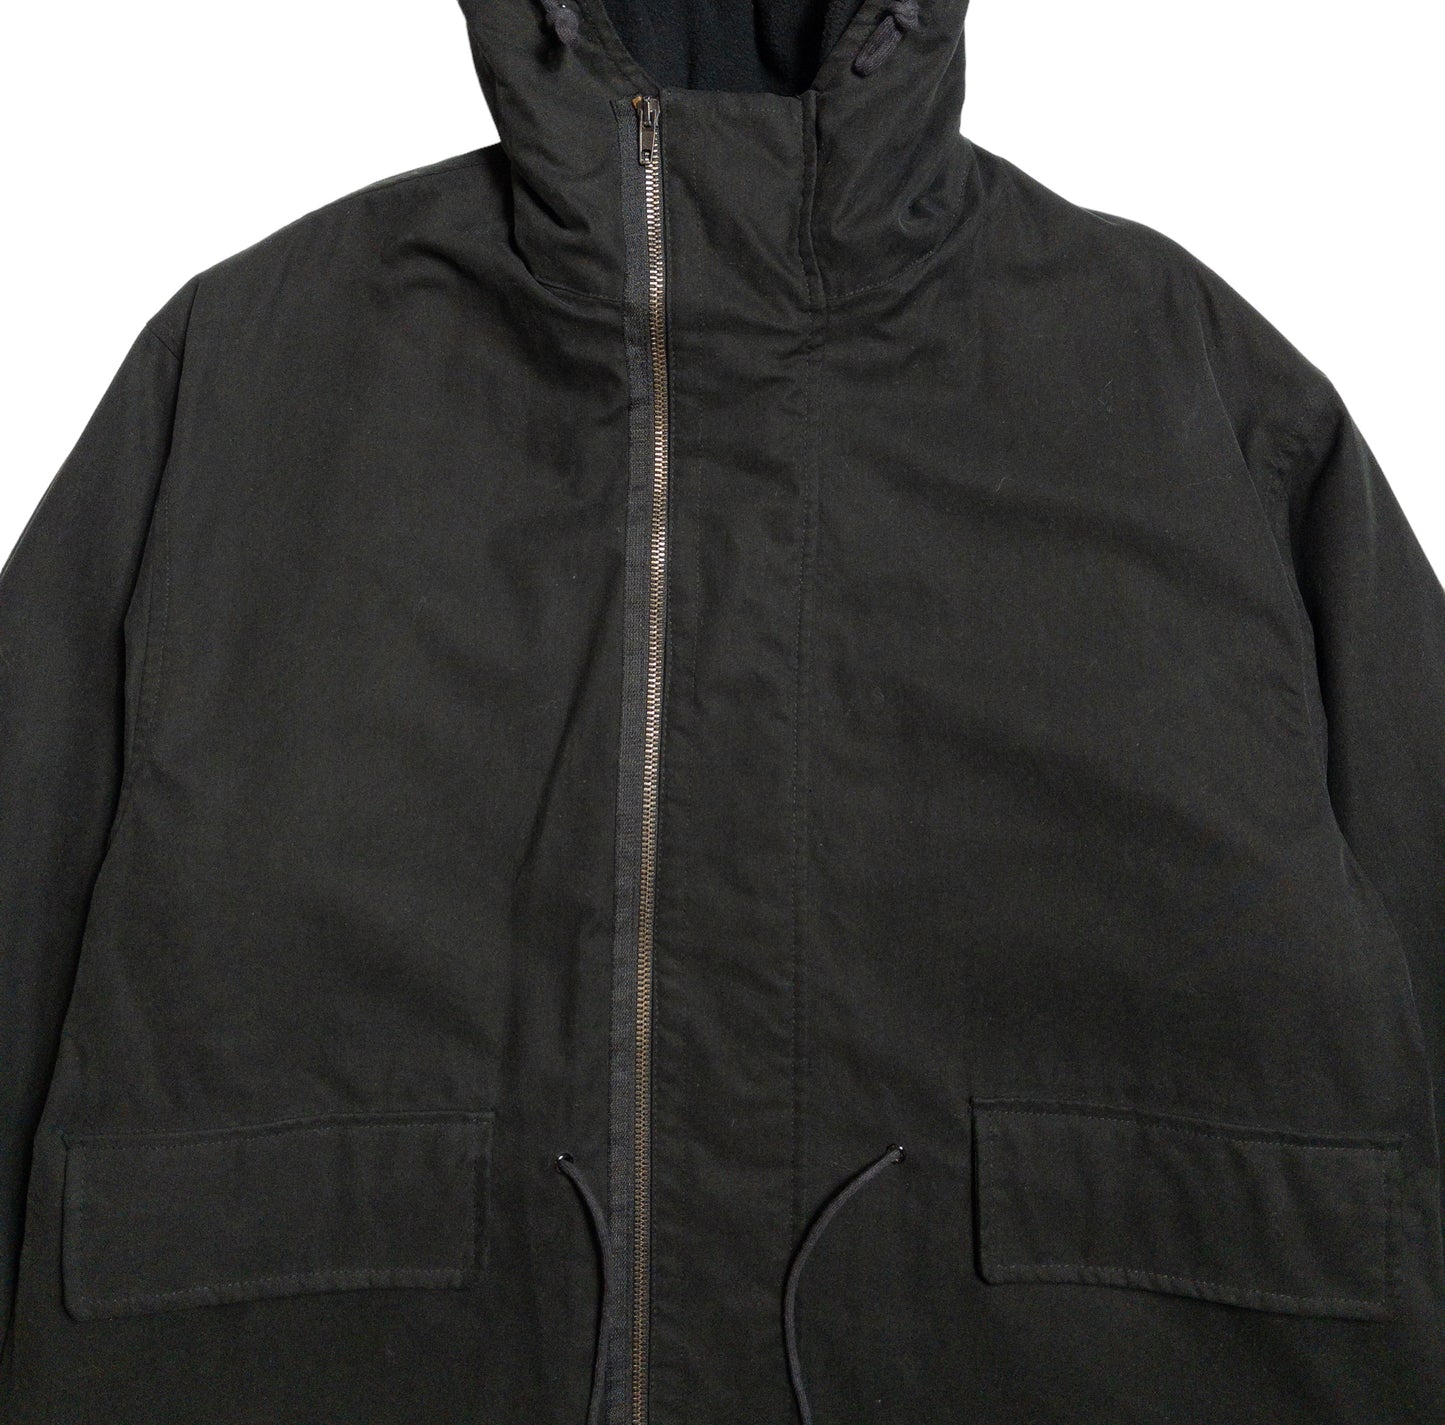 Helmut Lang AW98 Military Parka